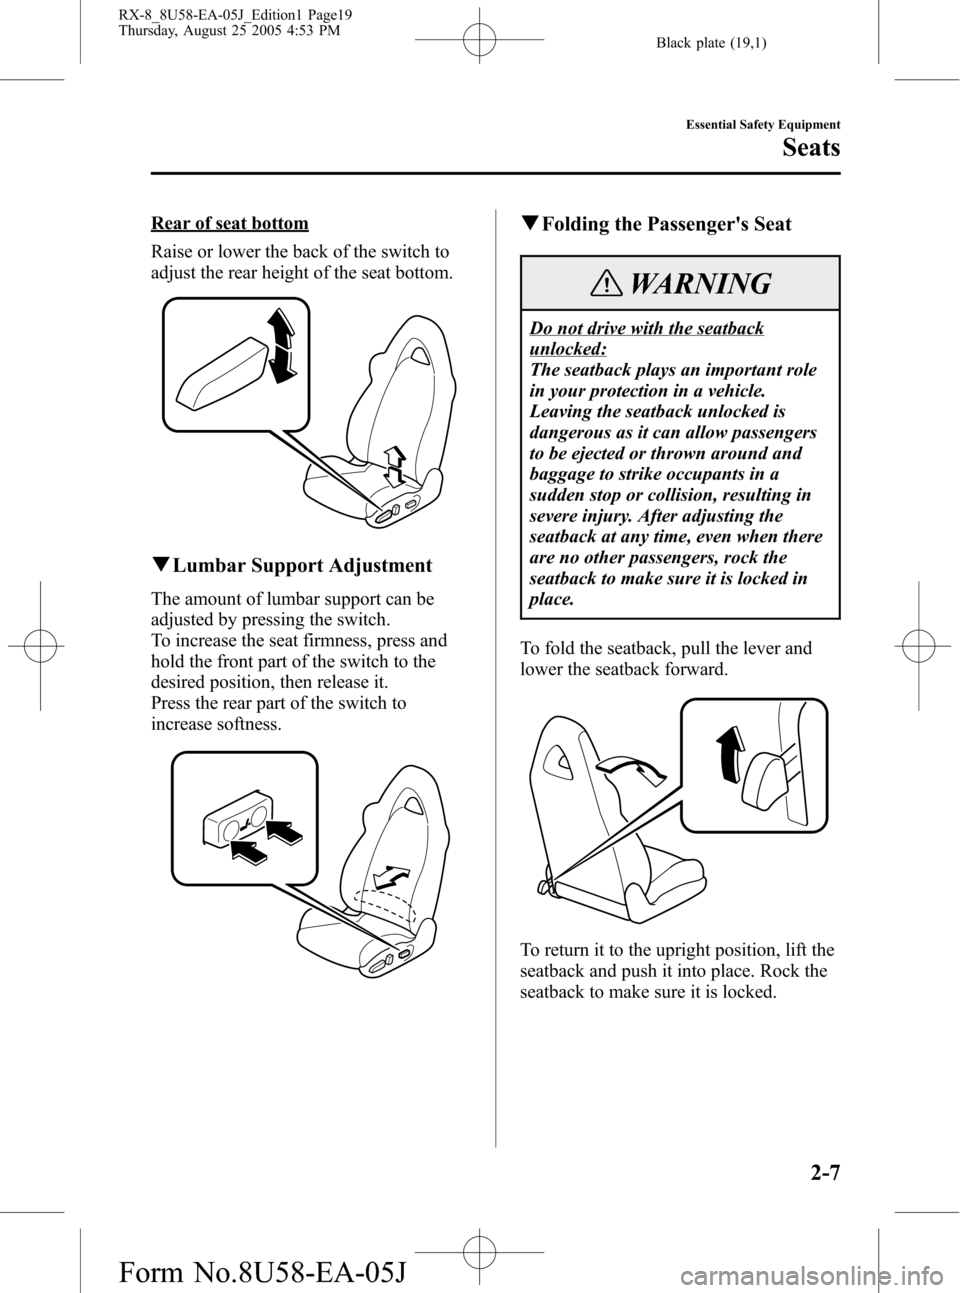 MAZDA MODEL RX 8 2006  Owners Manual (in English) Black plate (19,1)
Rear of seat bottom
Raise or lower the back of the switch to
adjust the rear height of the seat bottom.
qLumbar Support Adjustment
The amount of lumbar support can be
adjusted by pr